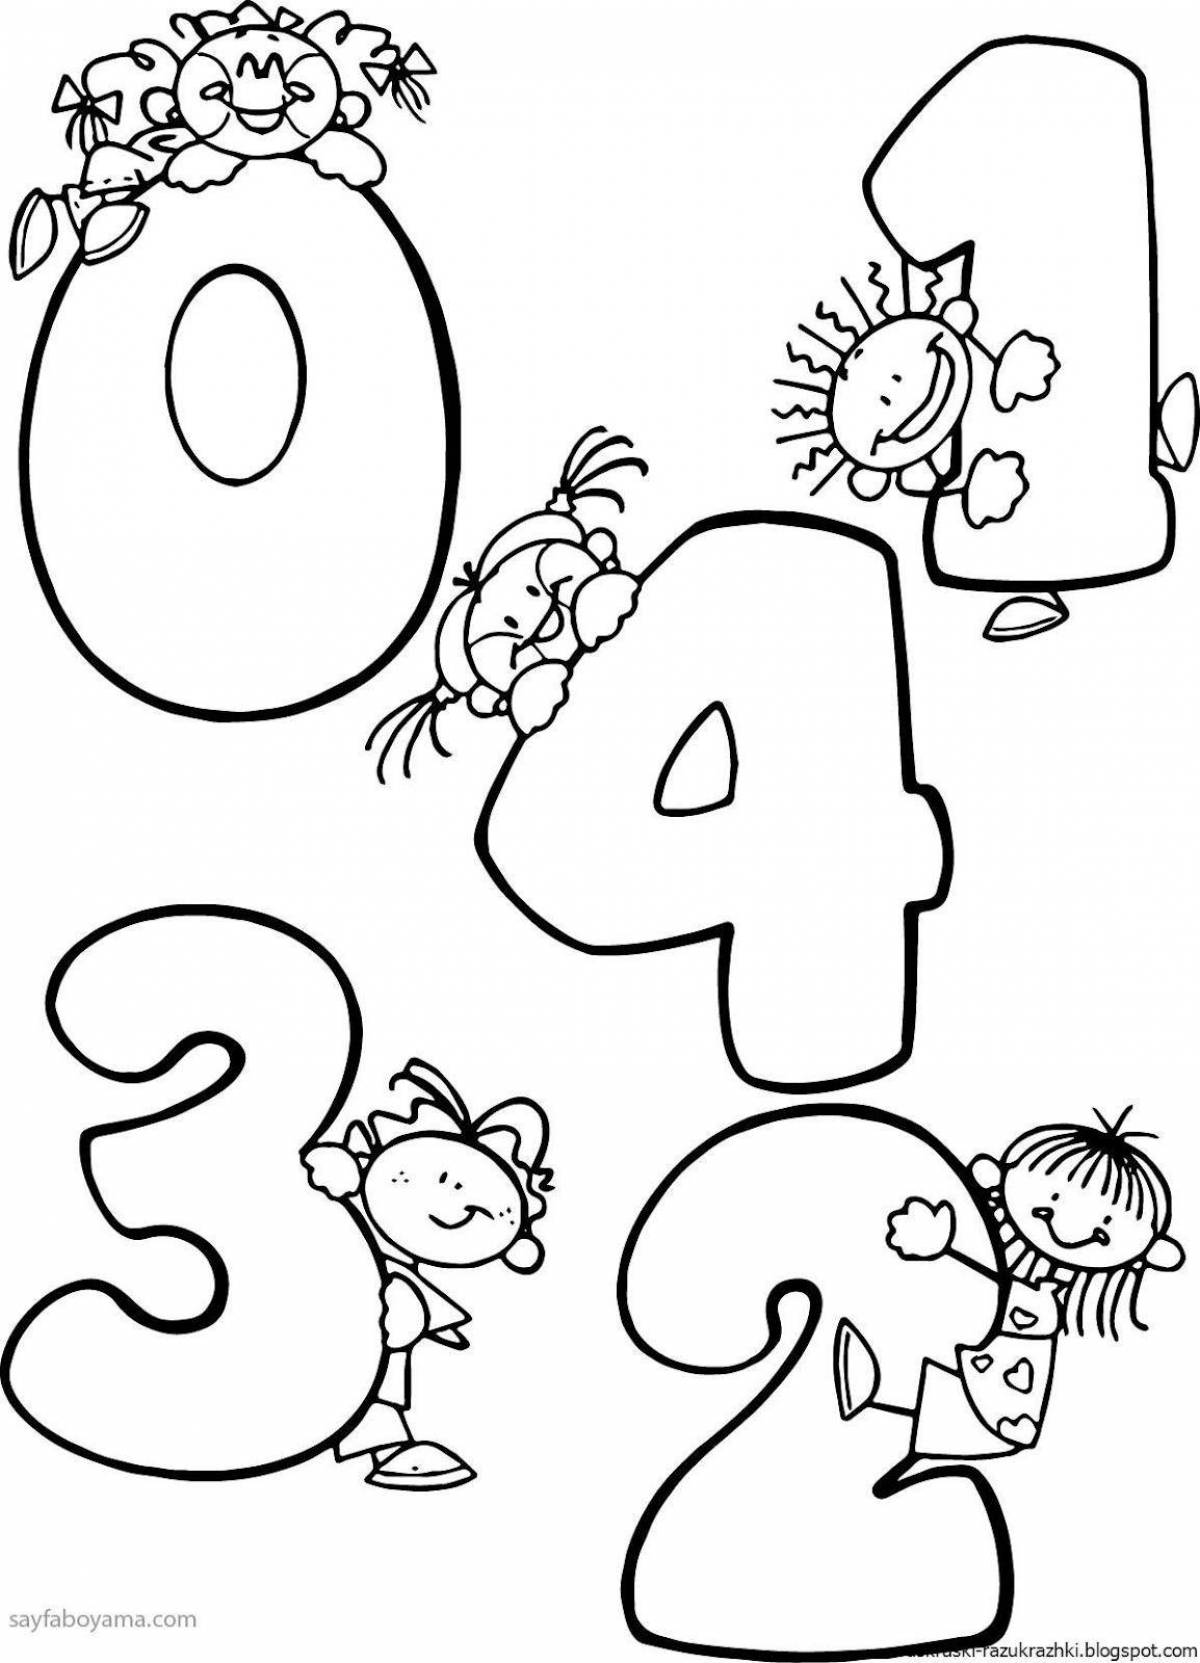 Coloring pages with funny numbers